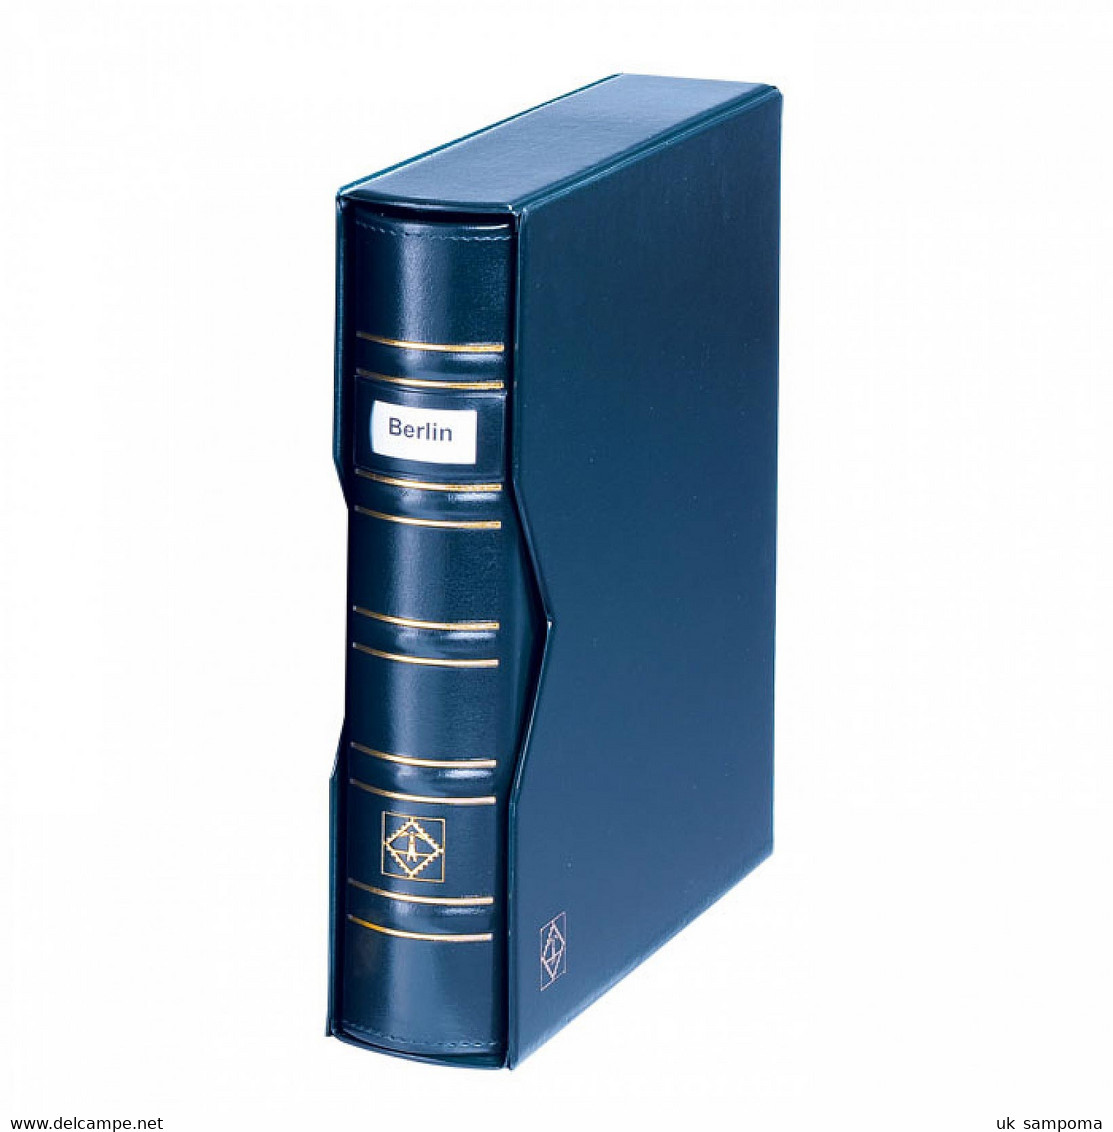 Ringbinder OPTIMA, Classic Design SIGNUM, With Labeling Field, Incl. Slipcase, Blue - Grand Format, Fond Noir